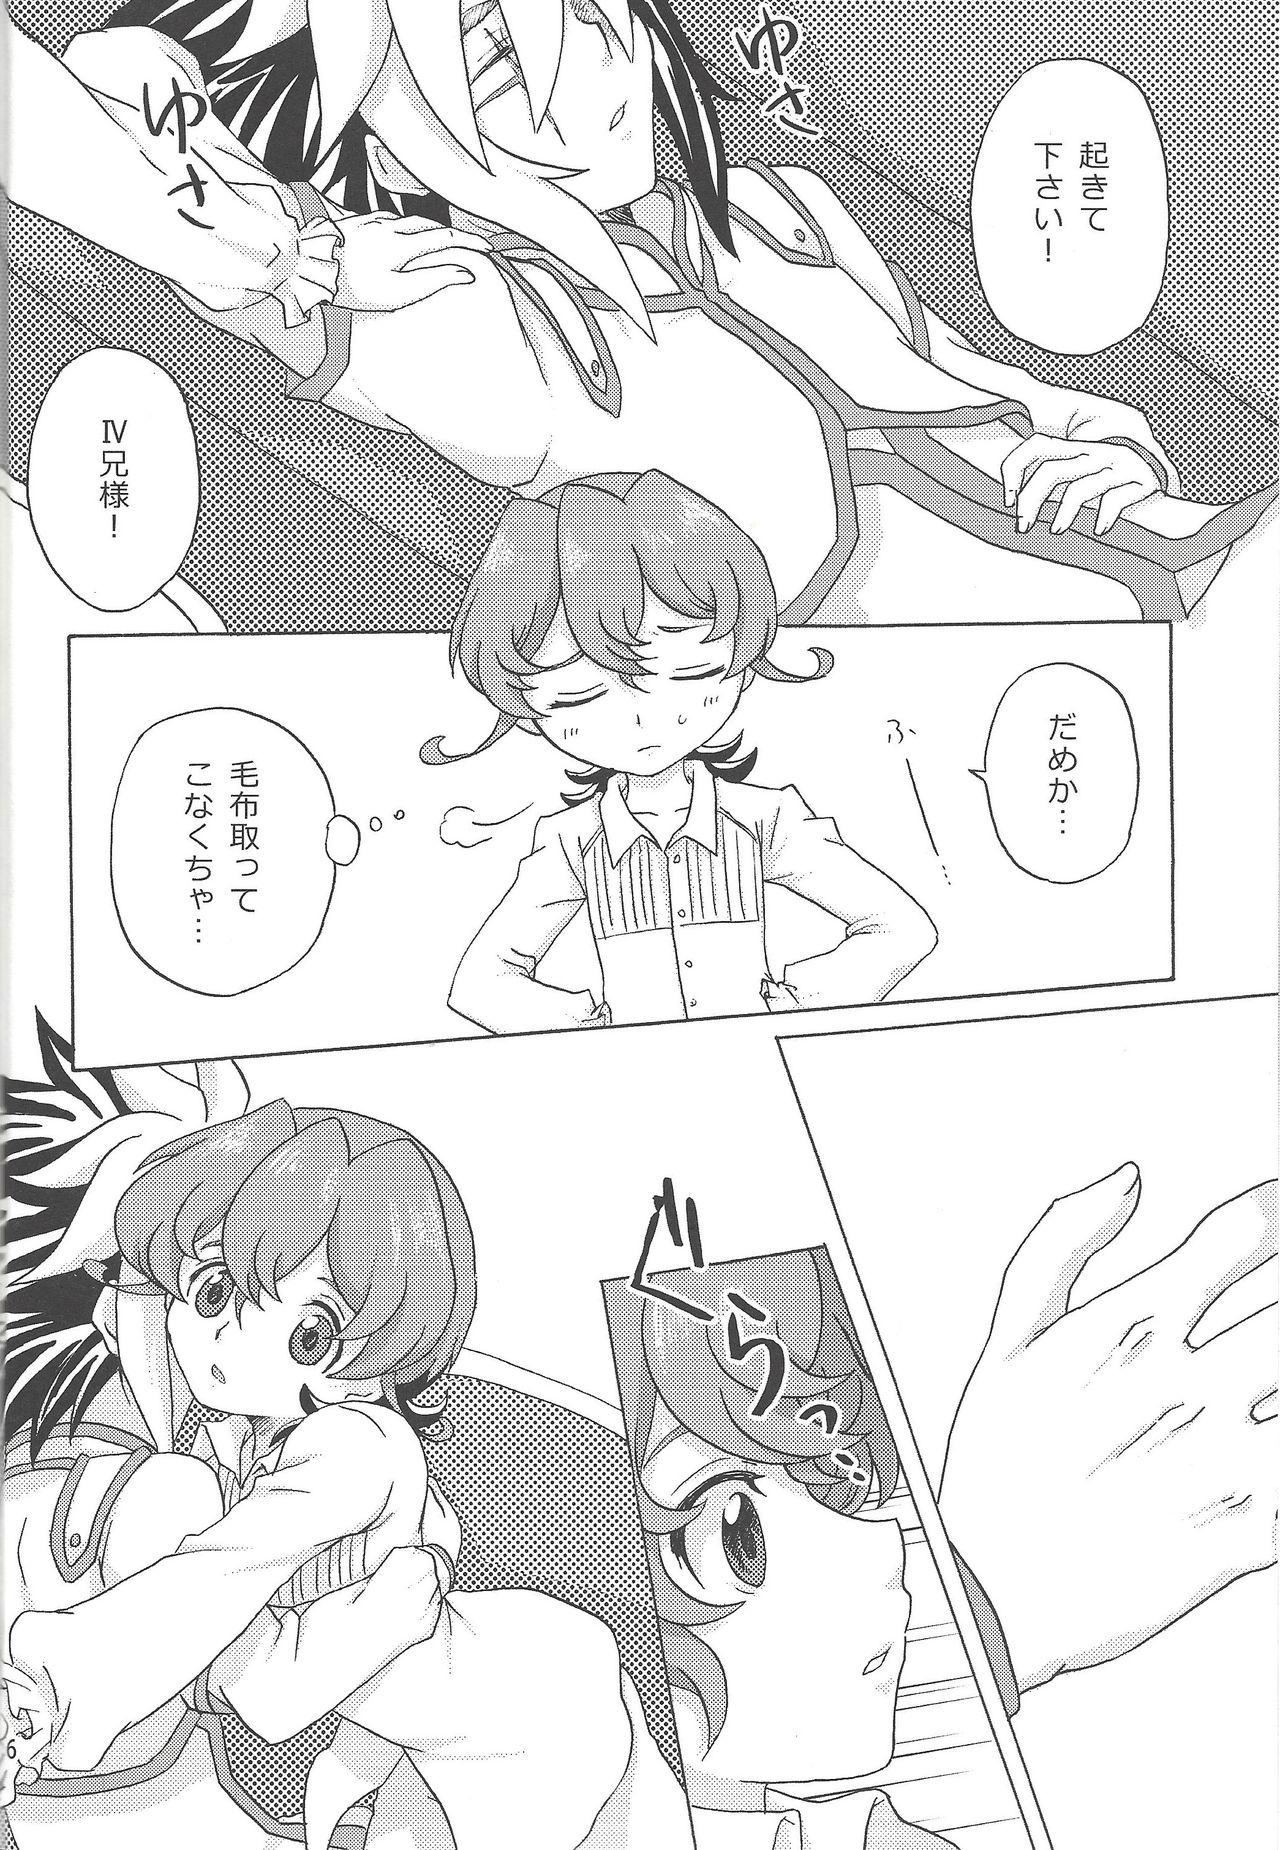 Adorable Sweet Children - Yu-gi-oh zexal Butthole - Page 5